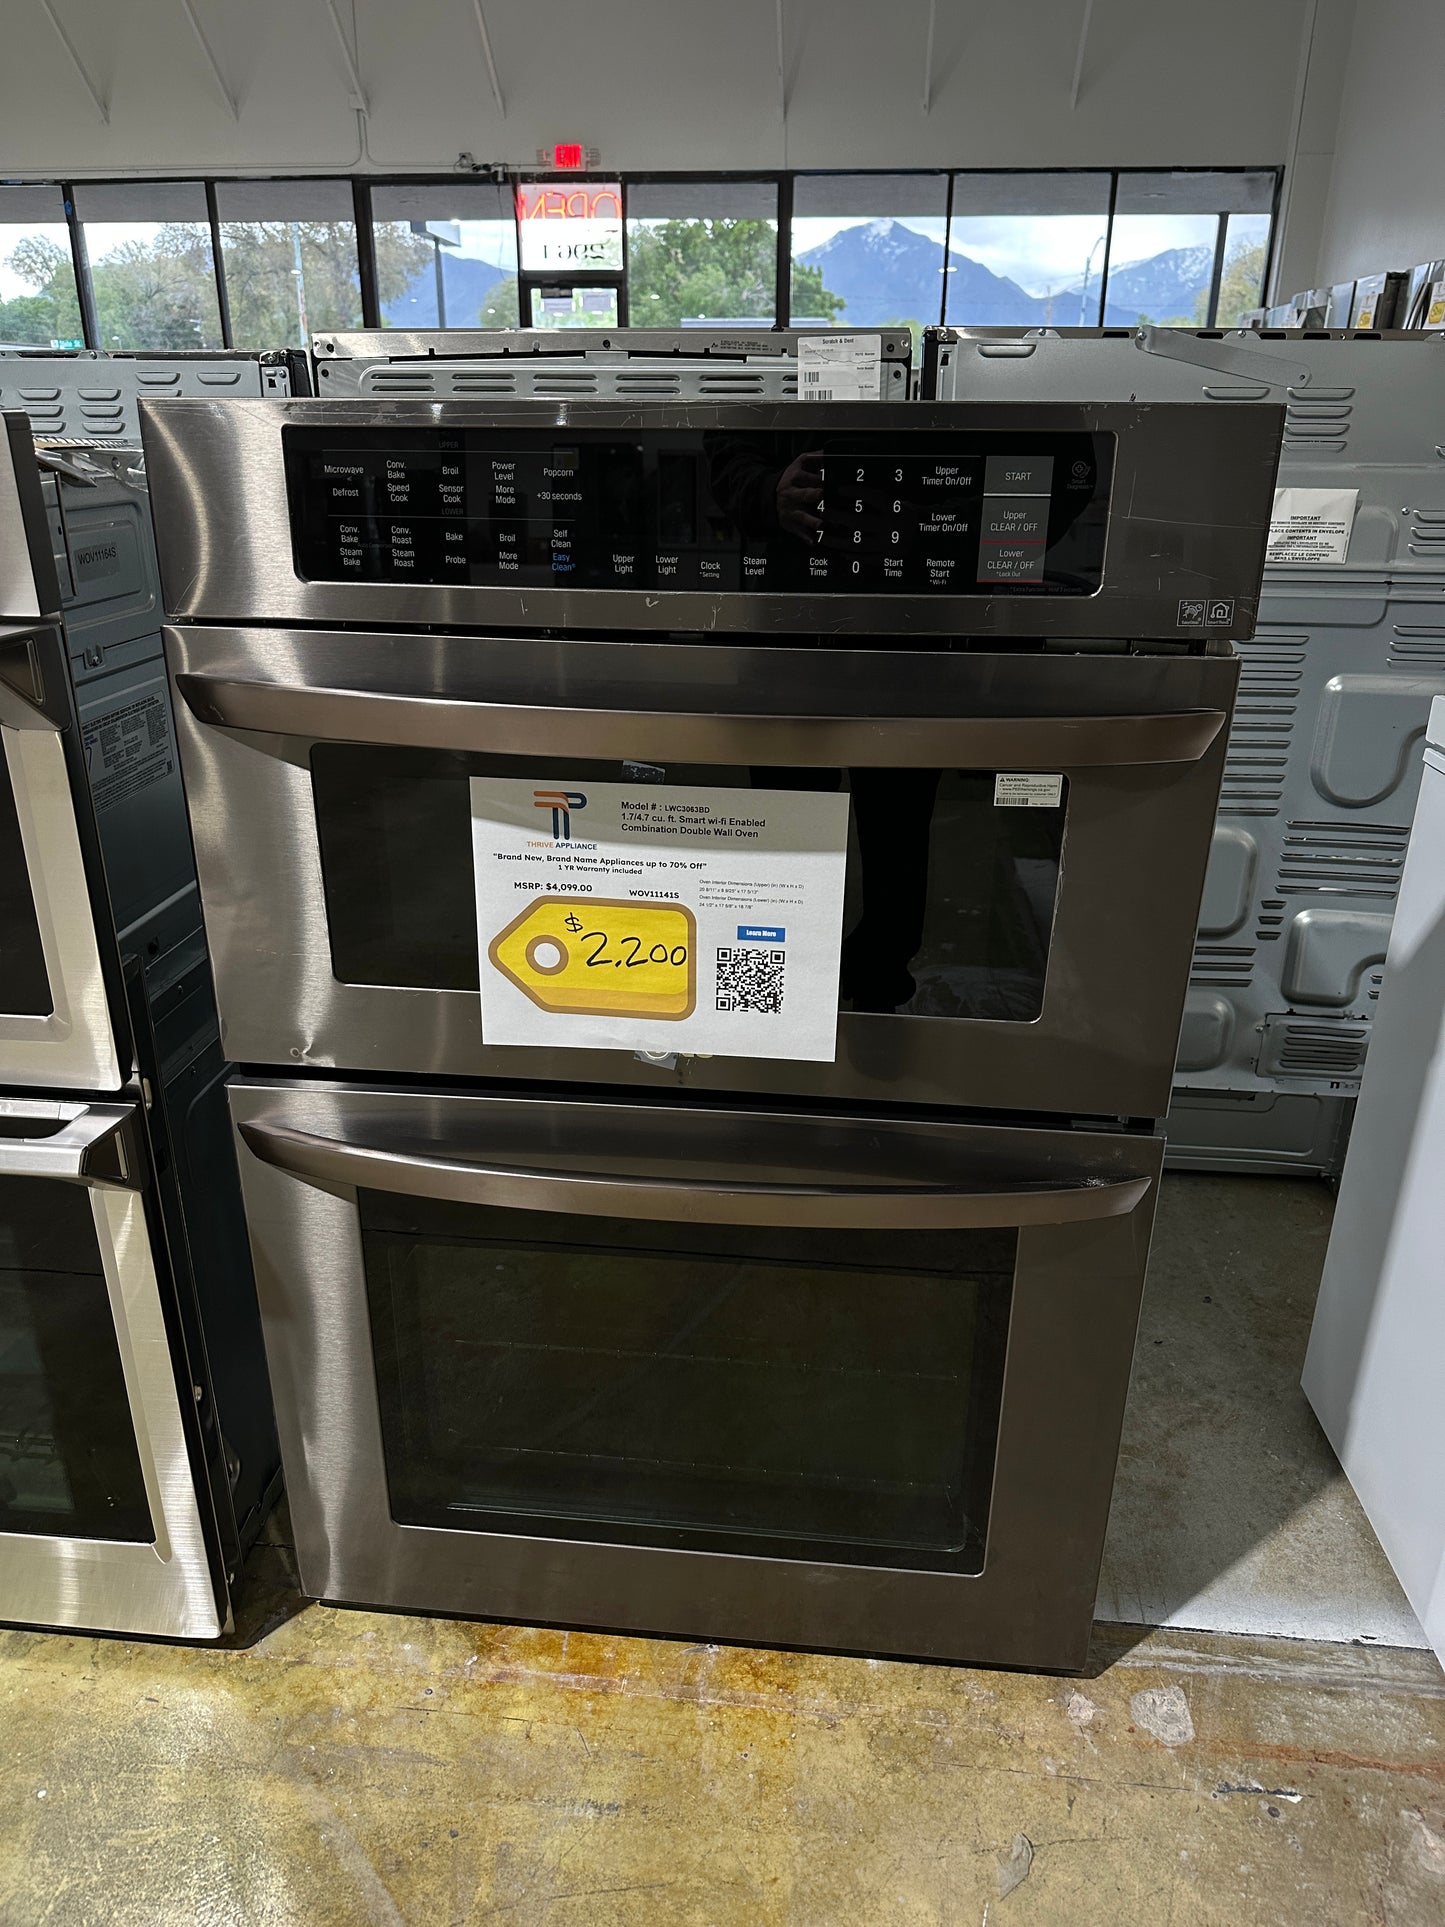 Combination Wall Oven with Microwave and Infrared Heating  Model:LWC3063BD  WOV11141S